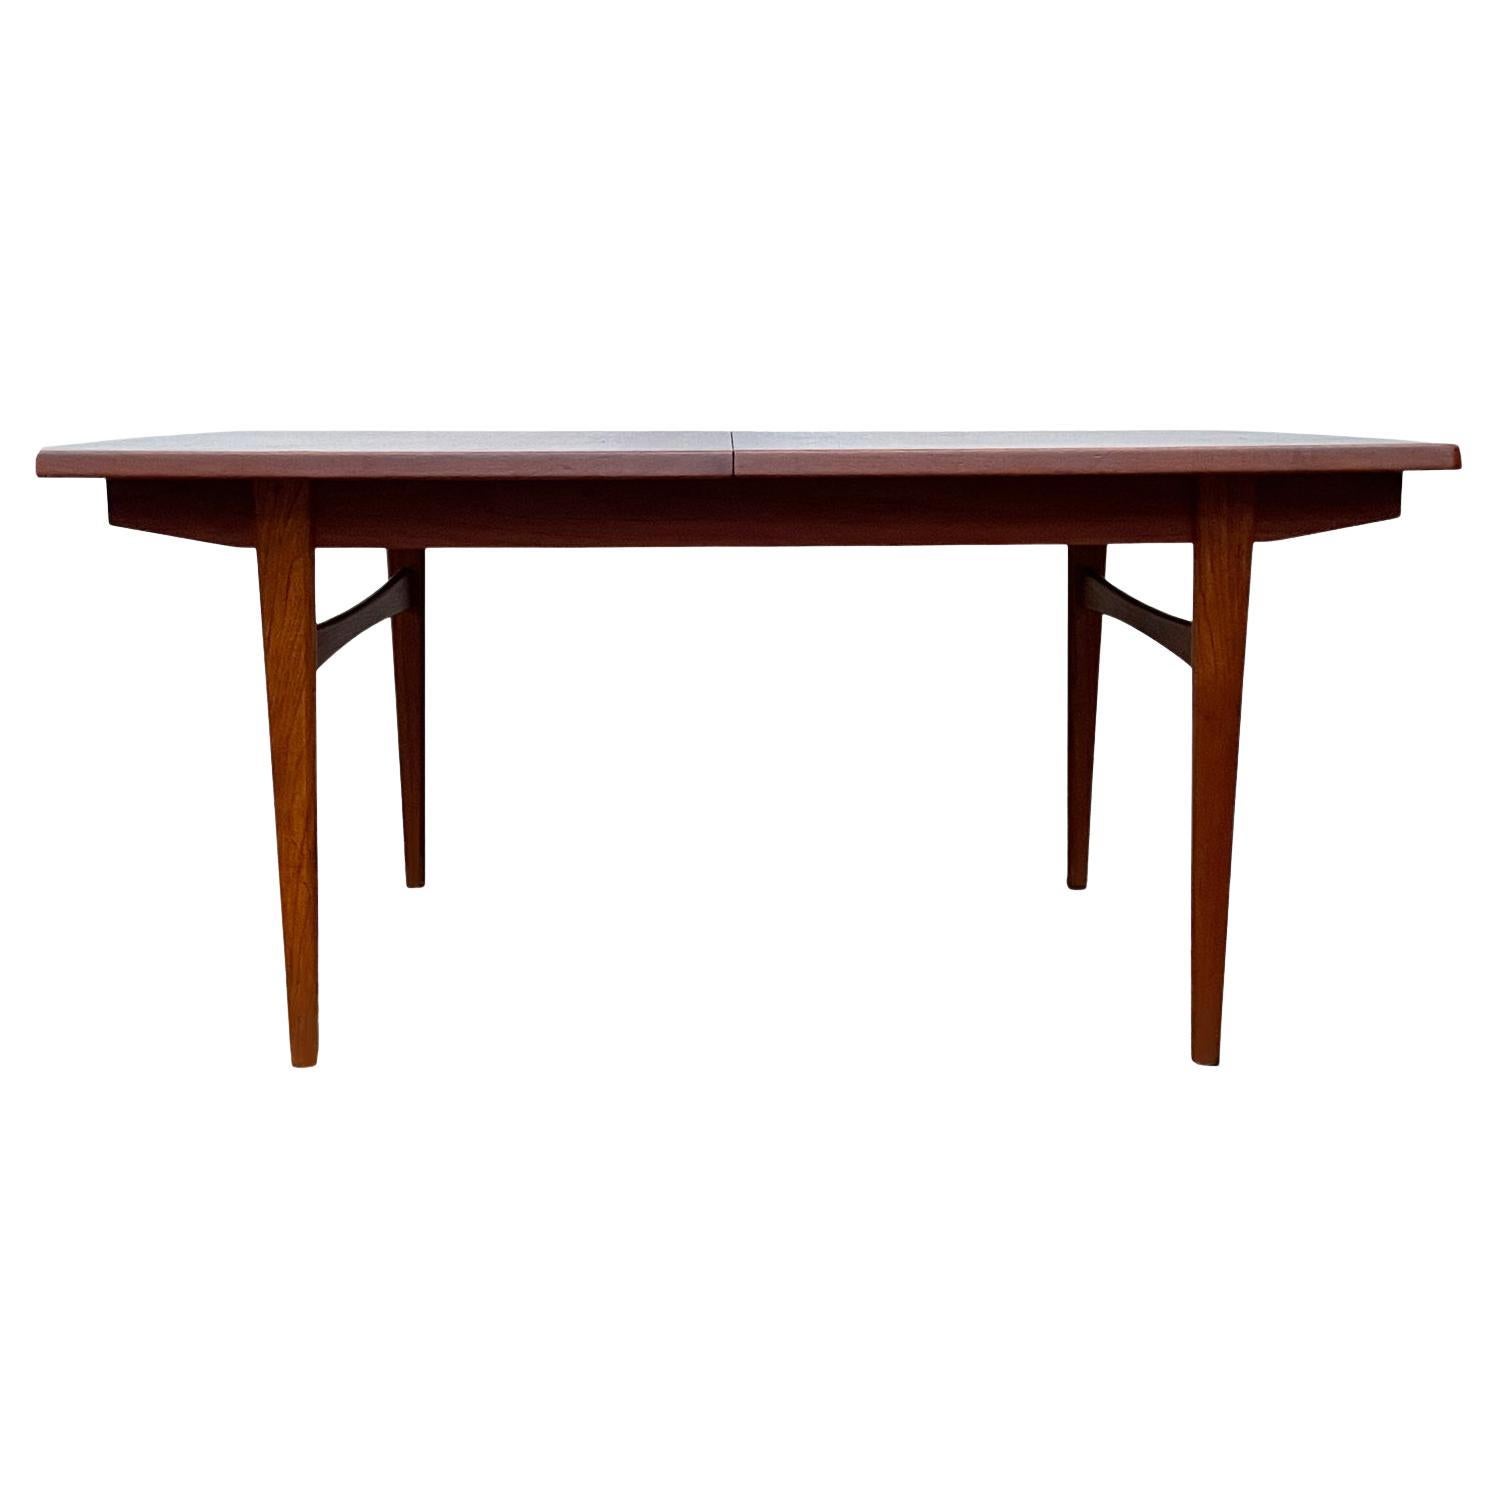 Mid Century Danish Modern Rectangular Dining Table in Teak with 2 Extension Leaf